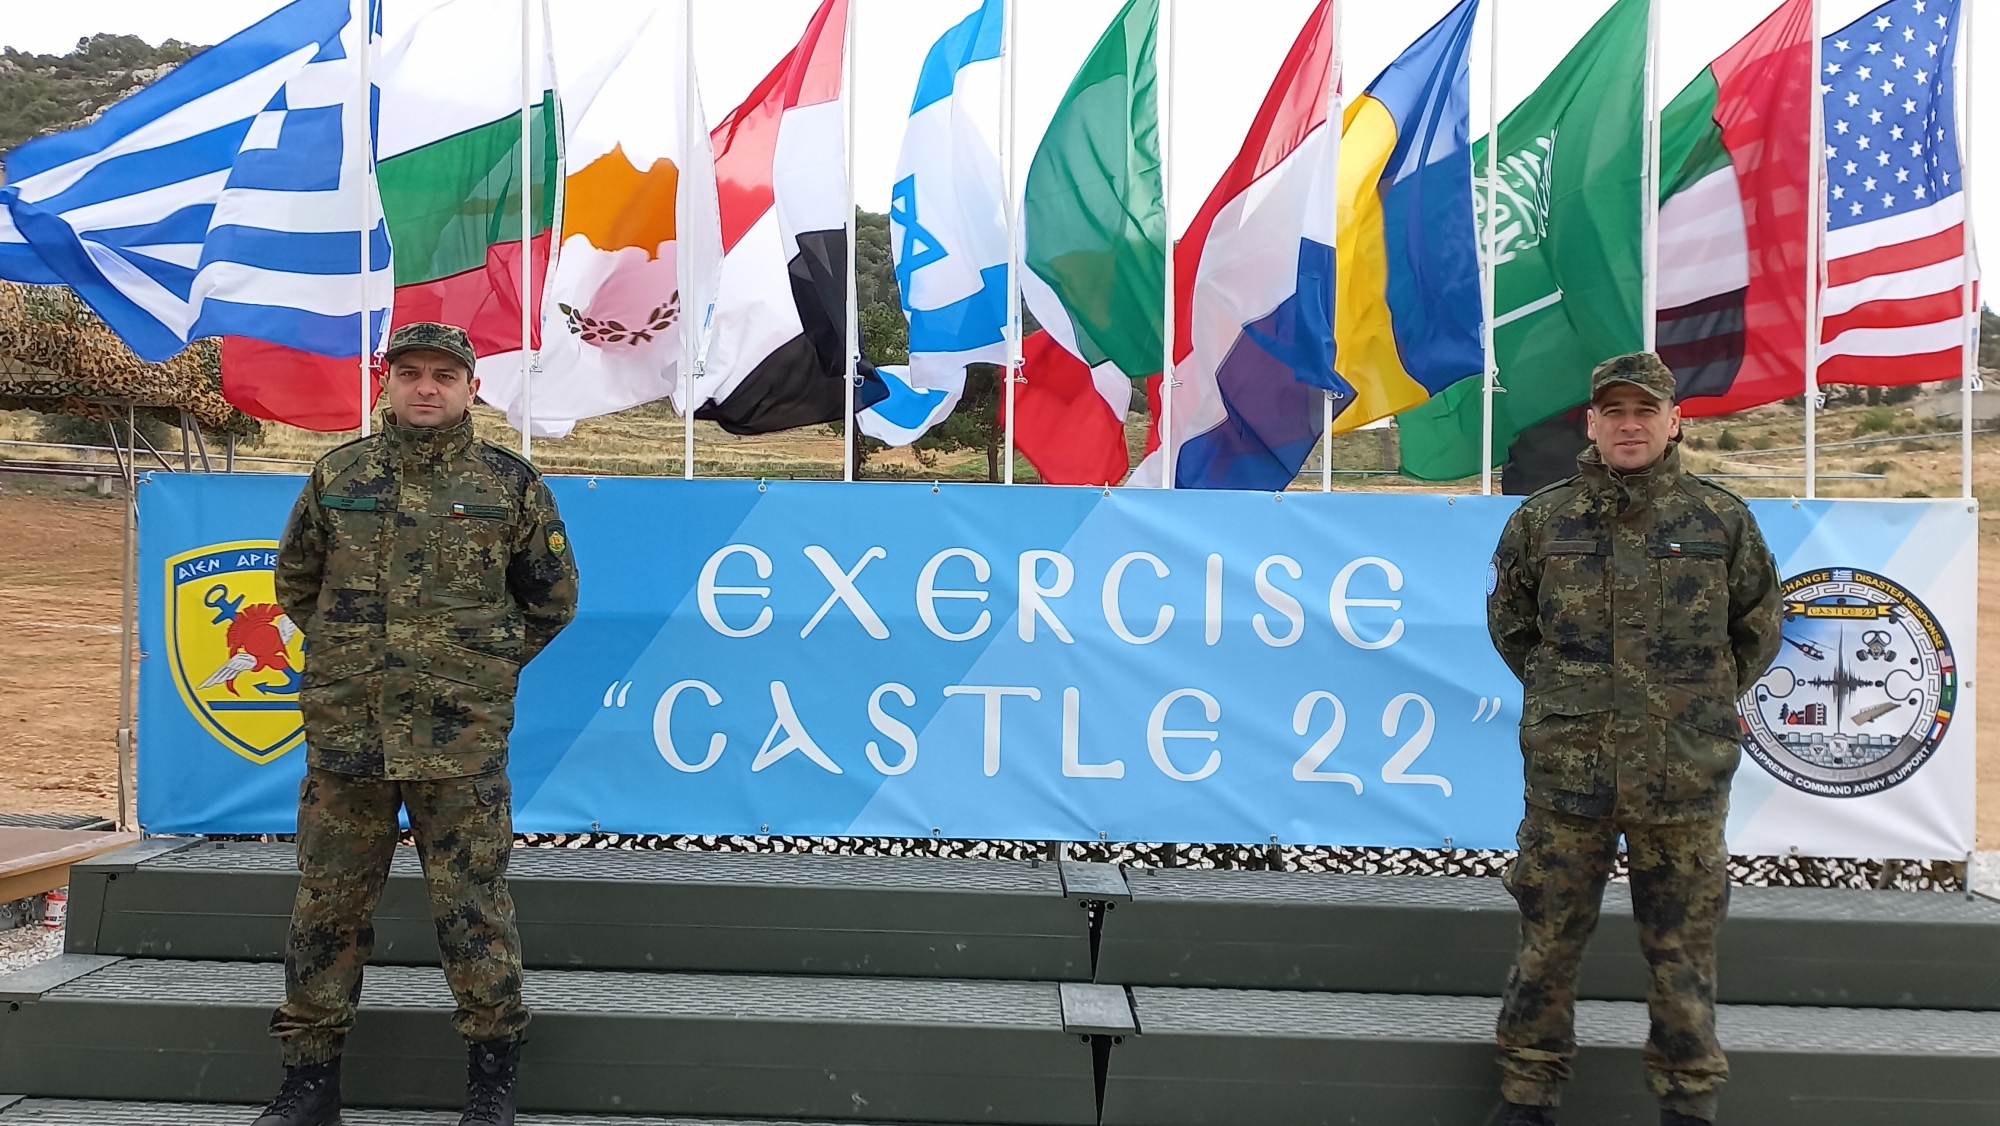 Multinational Exercise “Climate Change Disaster Response Castle-22”